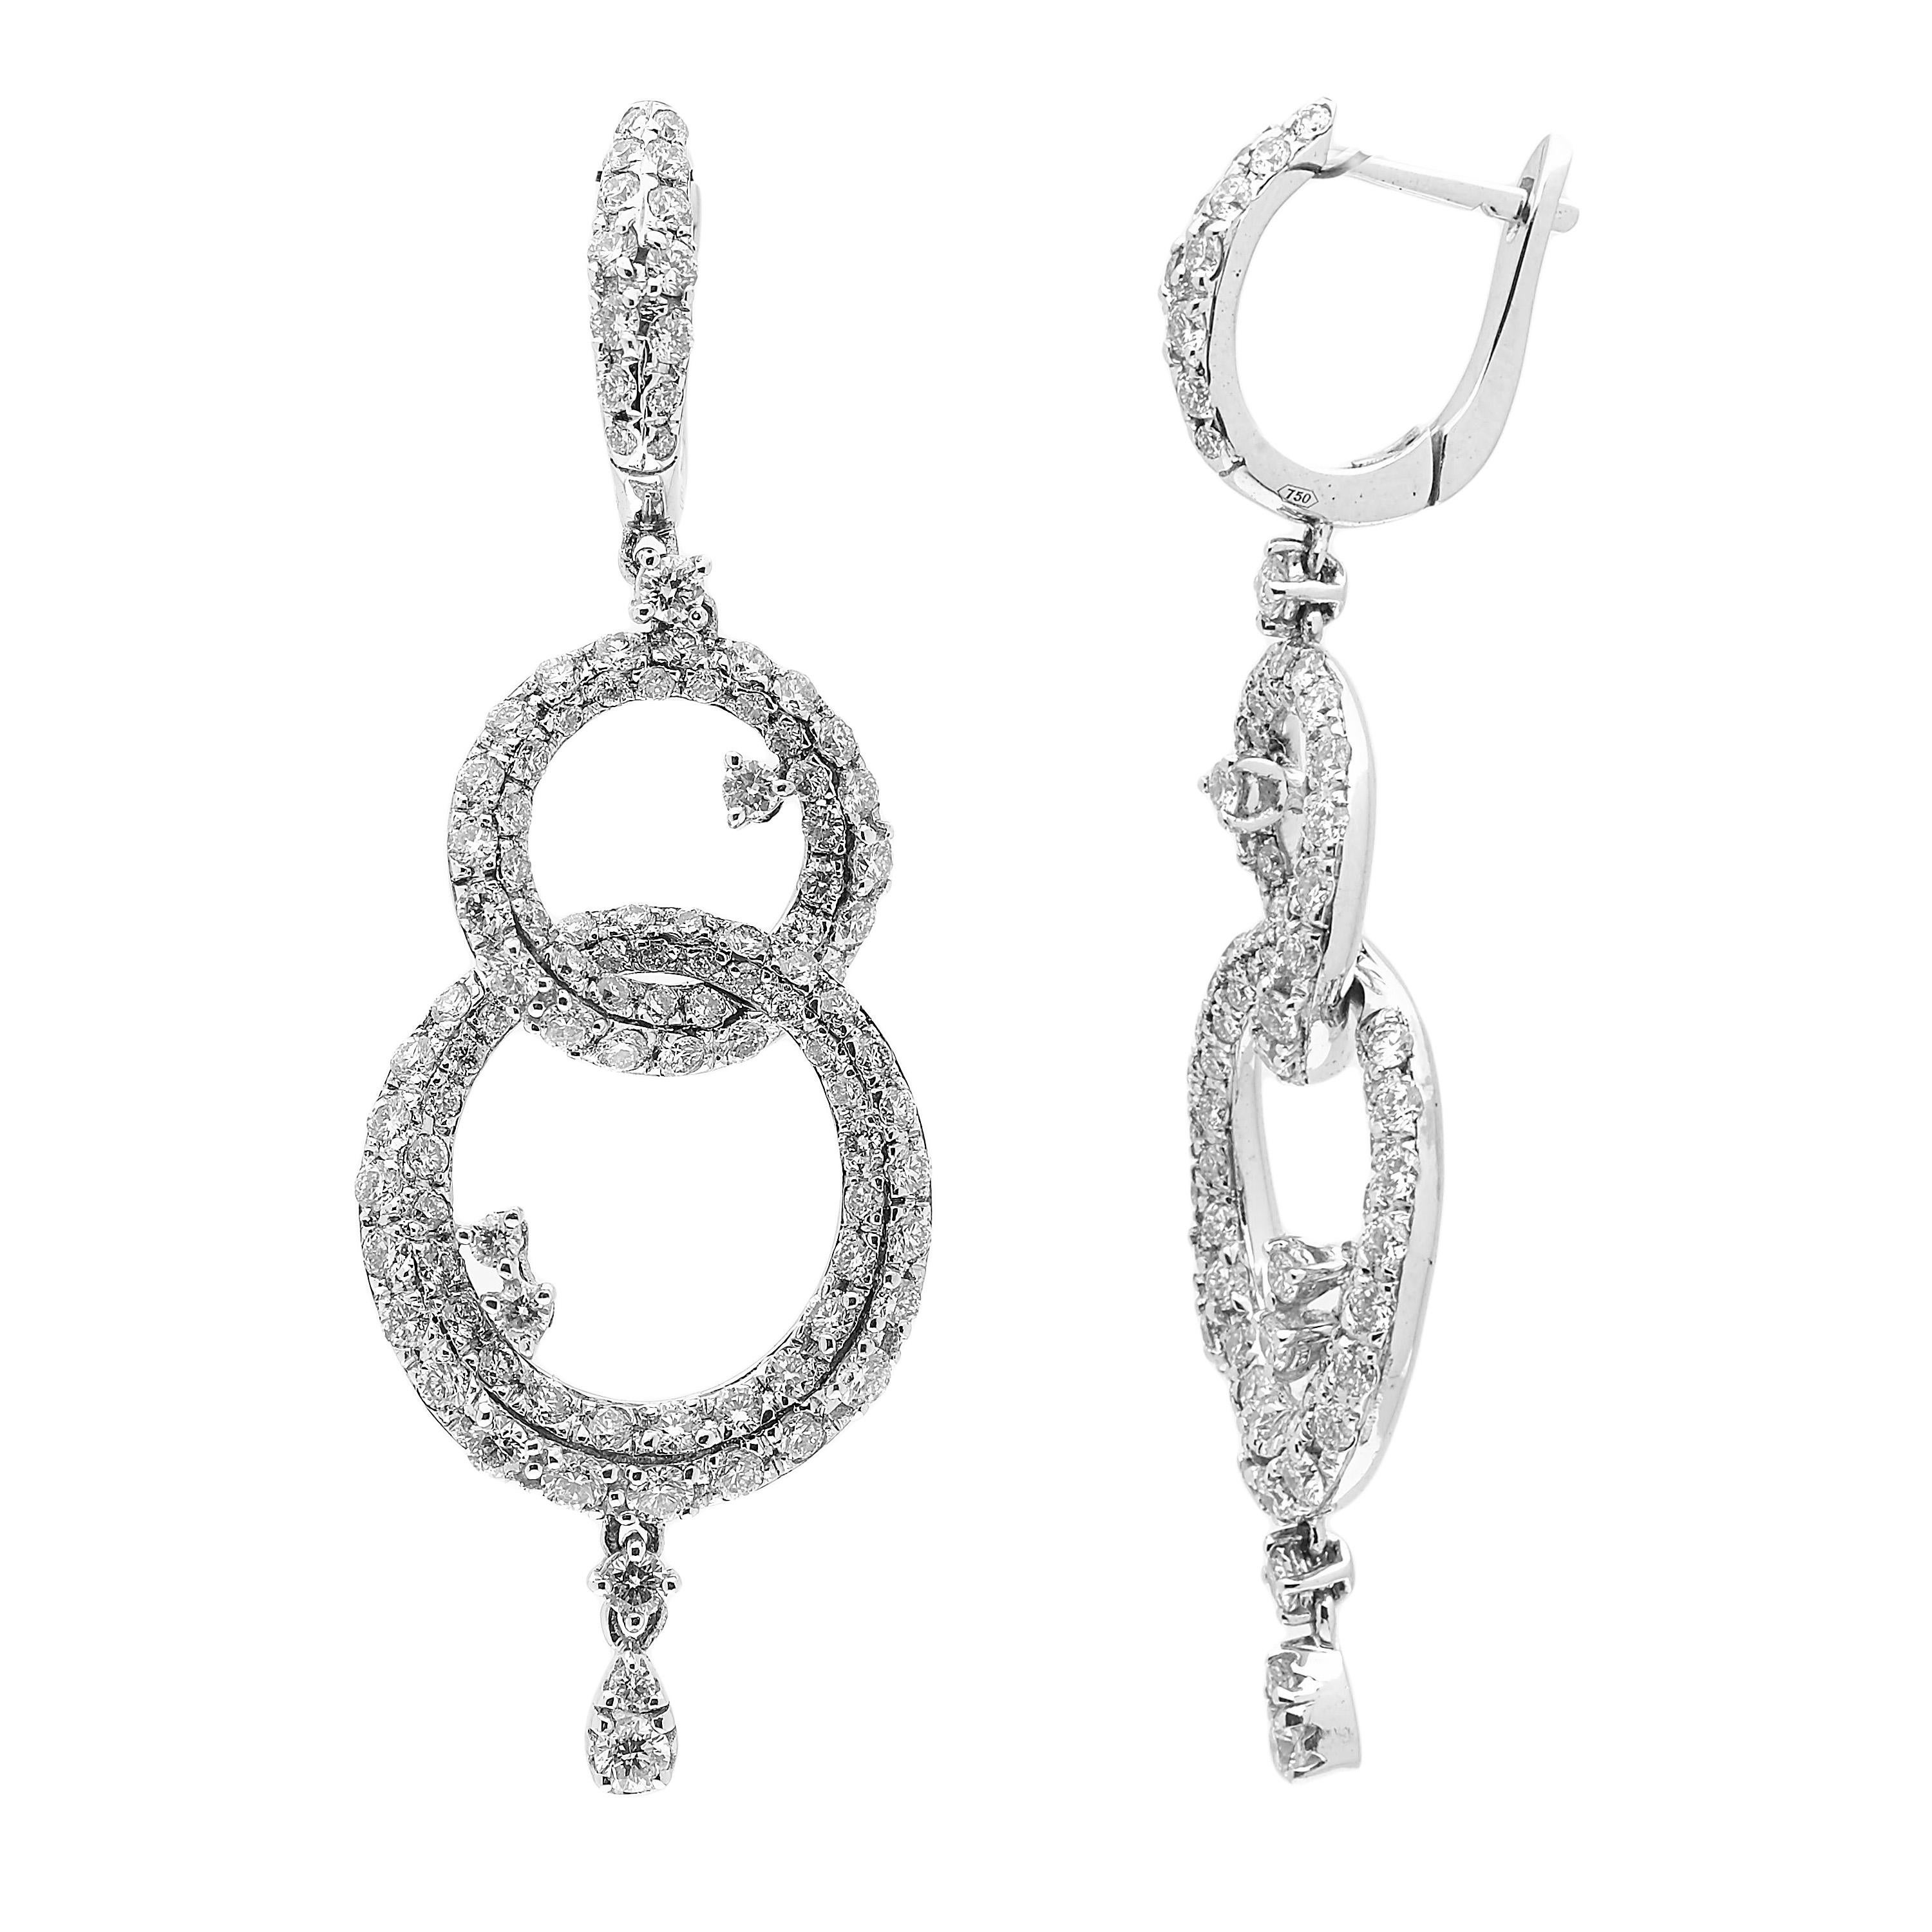 These unique drop earrings fashioned in 18kt white gold feature double interlocking hoops covered in a bright white diamond pavé totalling up to 3.59ct. A few floating stones on the inside of the hoops add to that extra special unique feel. 